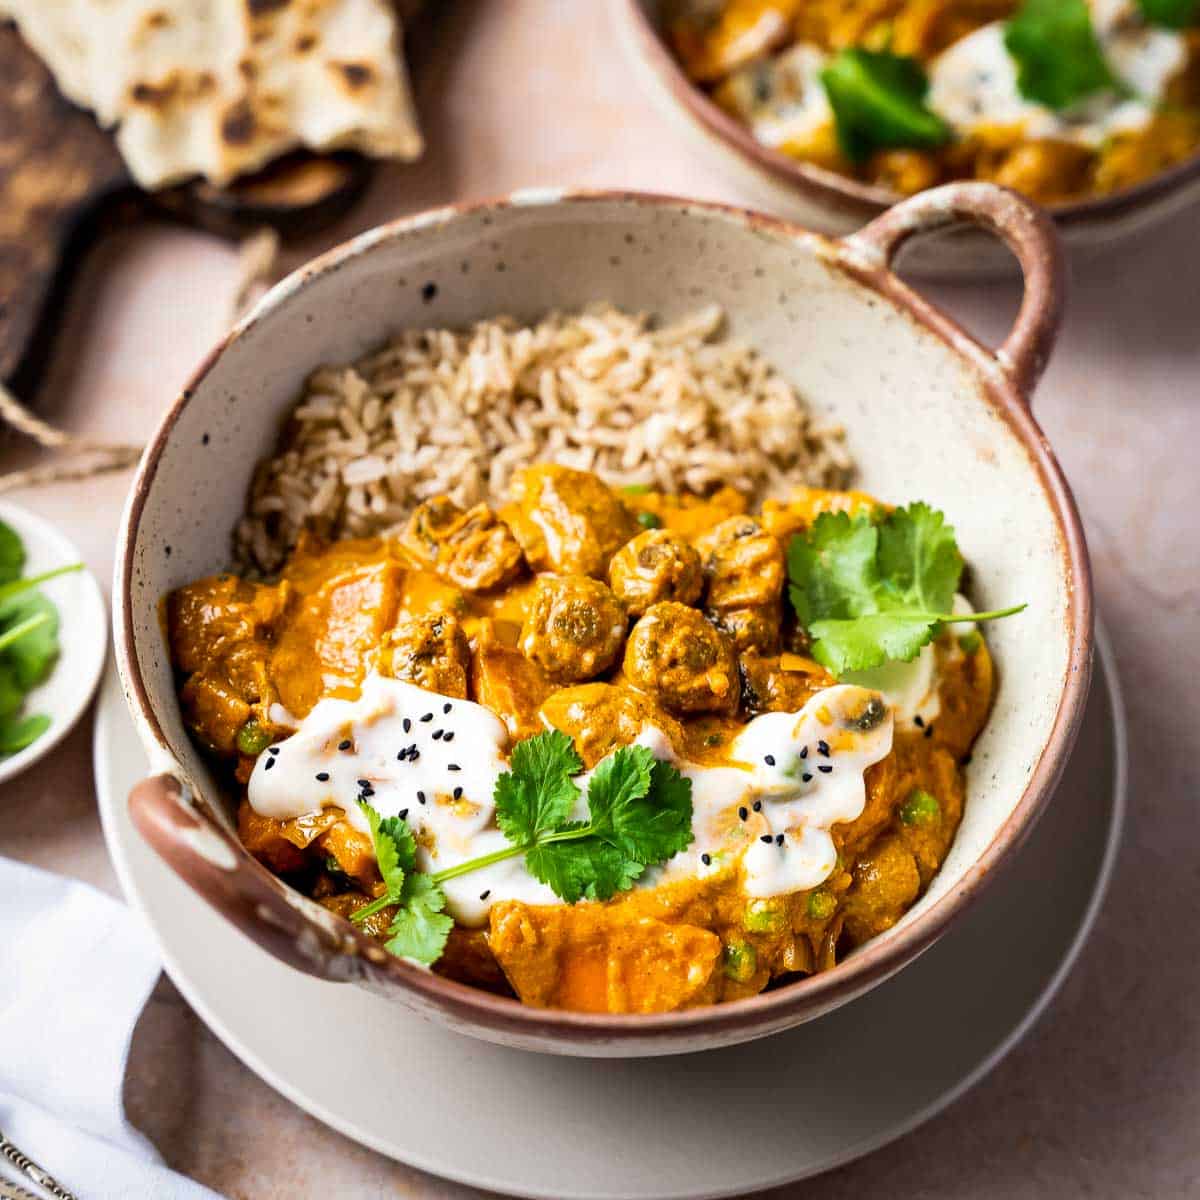 Overhead angled shot of tikka masala with rice in a brown speckled bowl on a grey plate with naan and a wooden cutting board in the background.